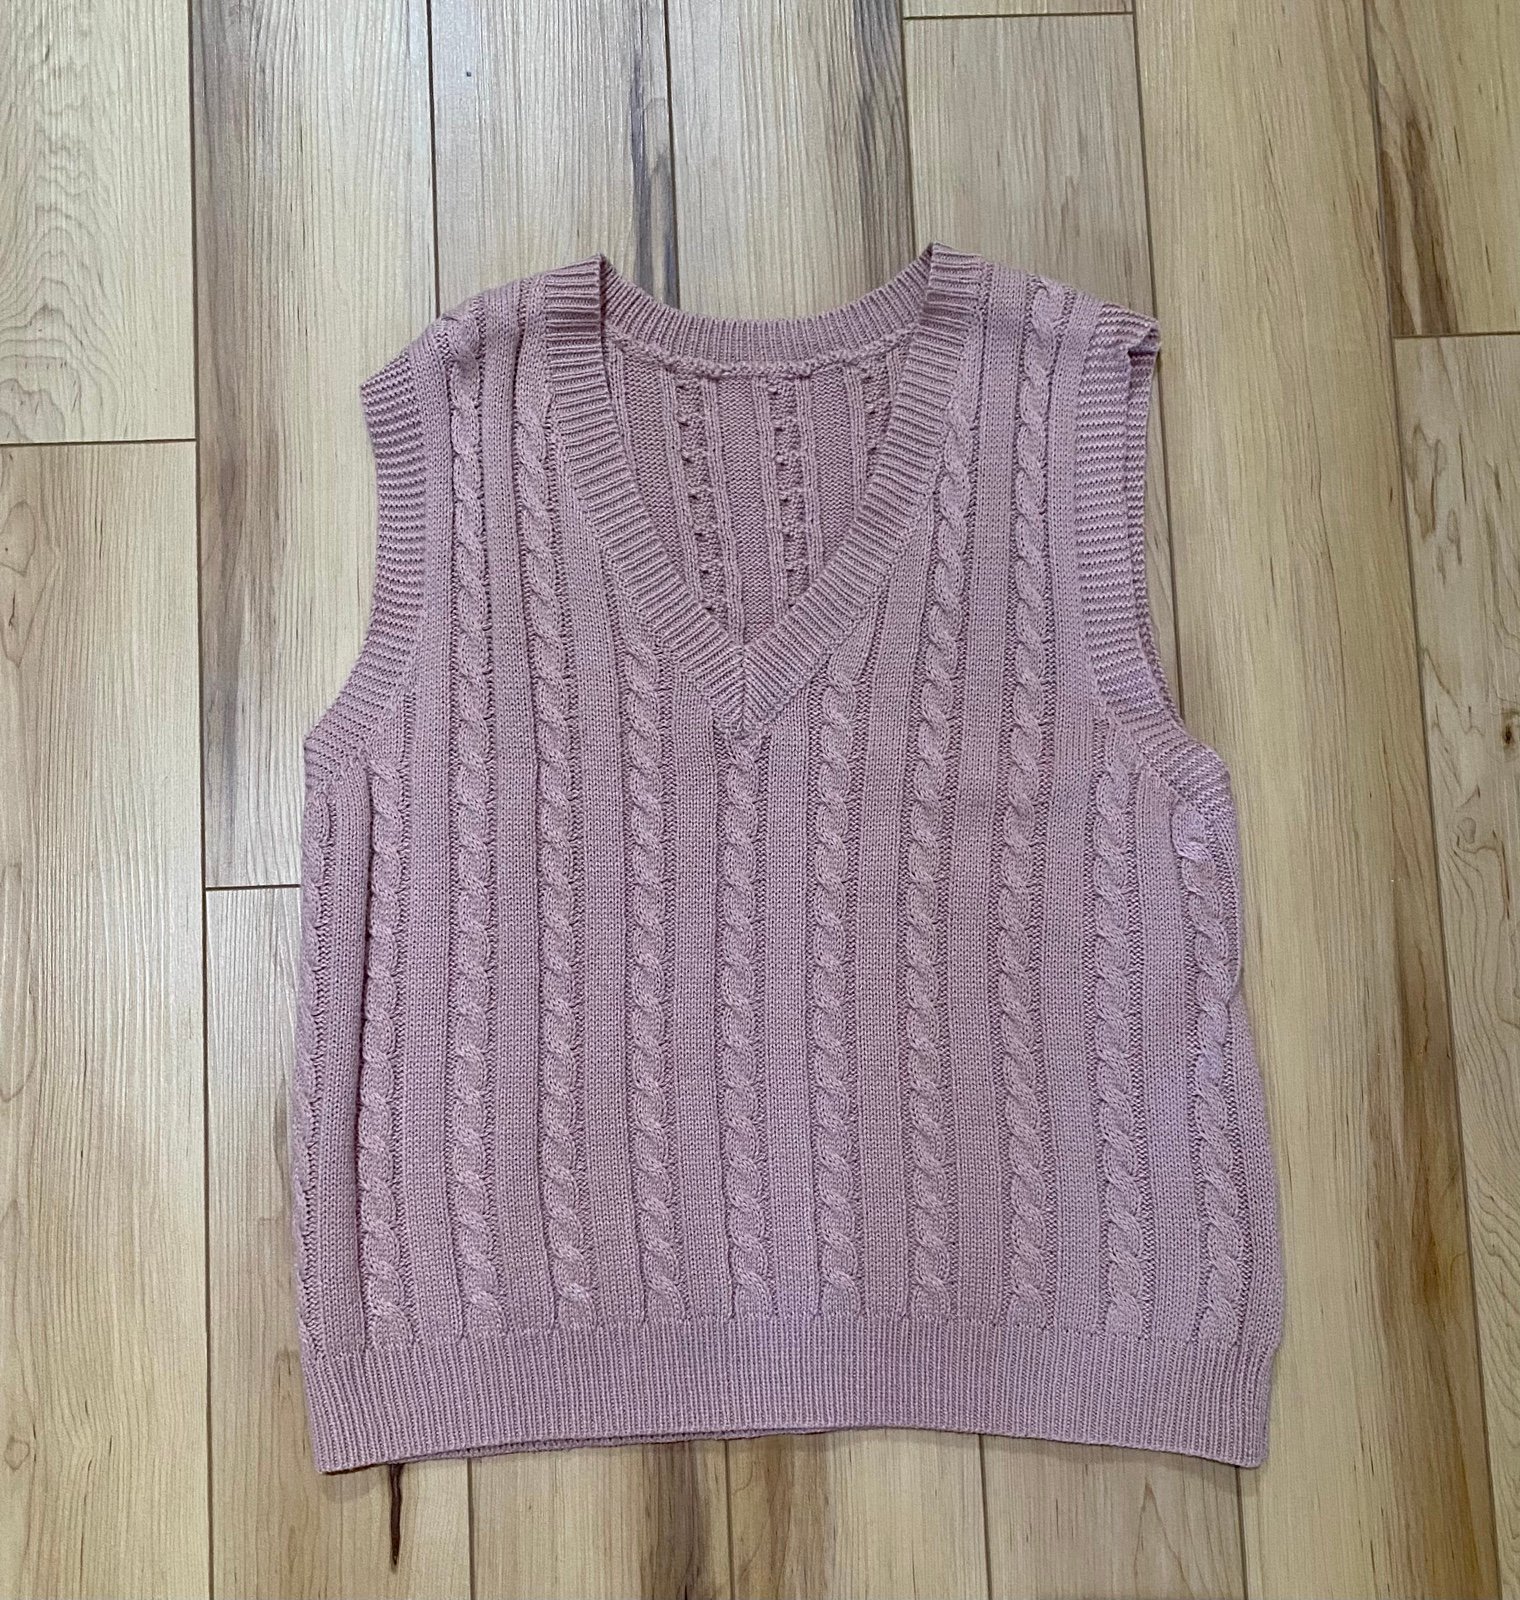 reasonable price Women’s Pink Stretch Cable Knit Sweater Vest Size Large nXOtql45C US Outlet